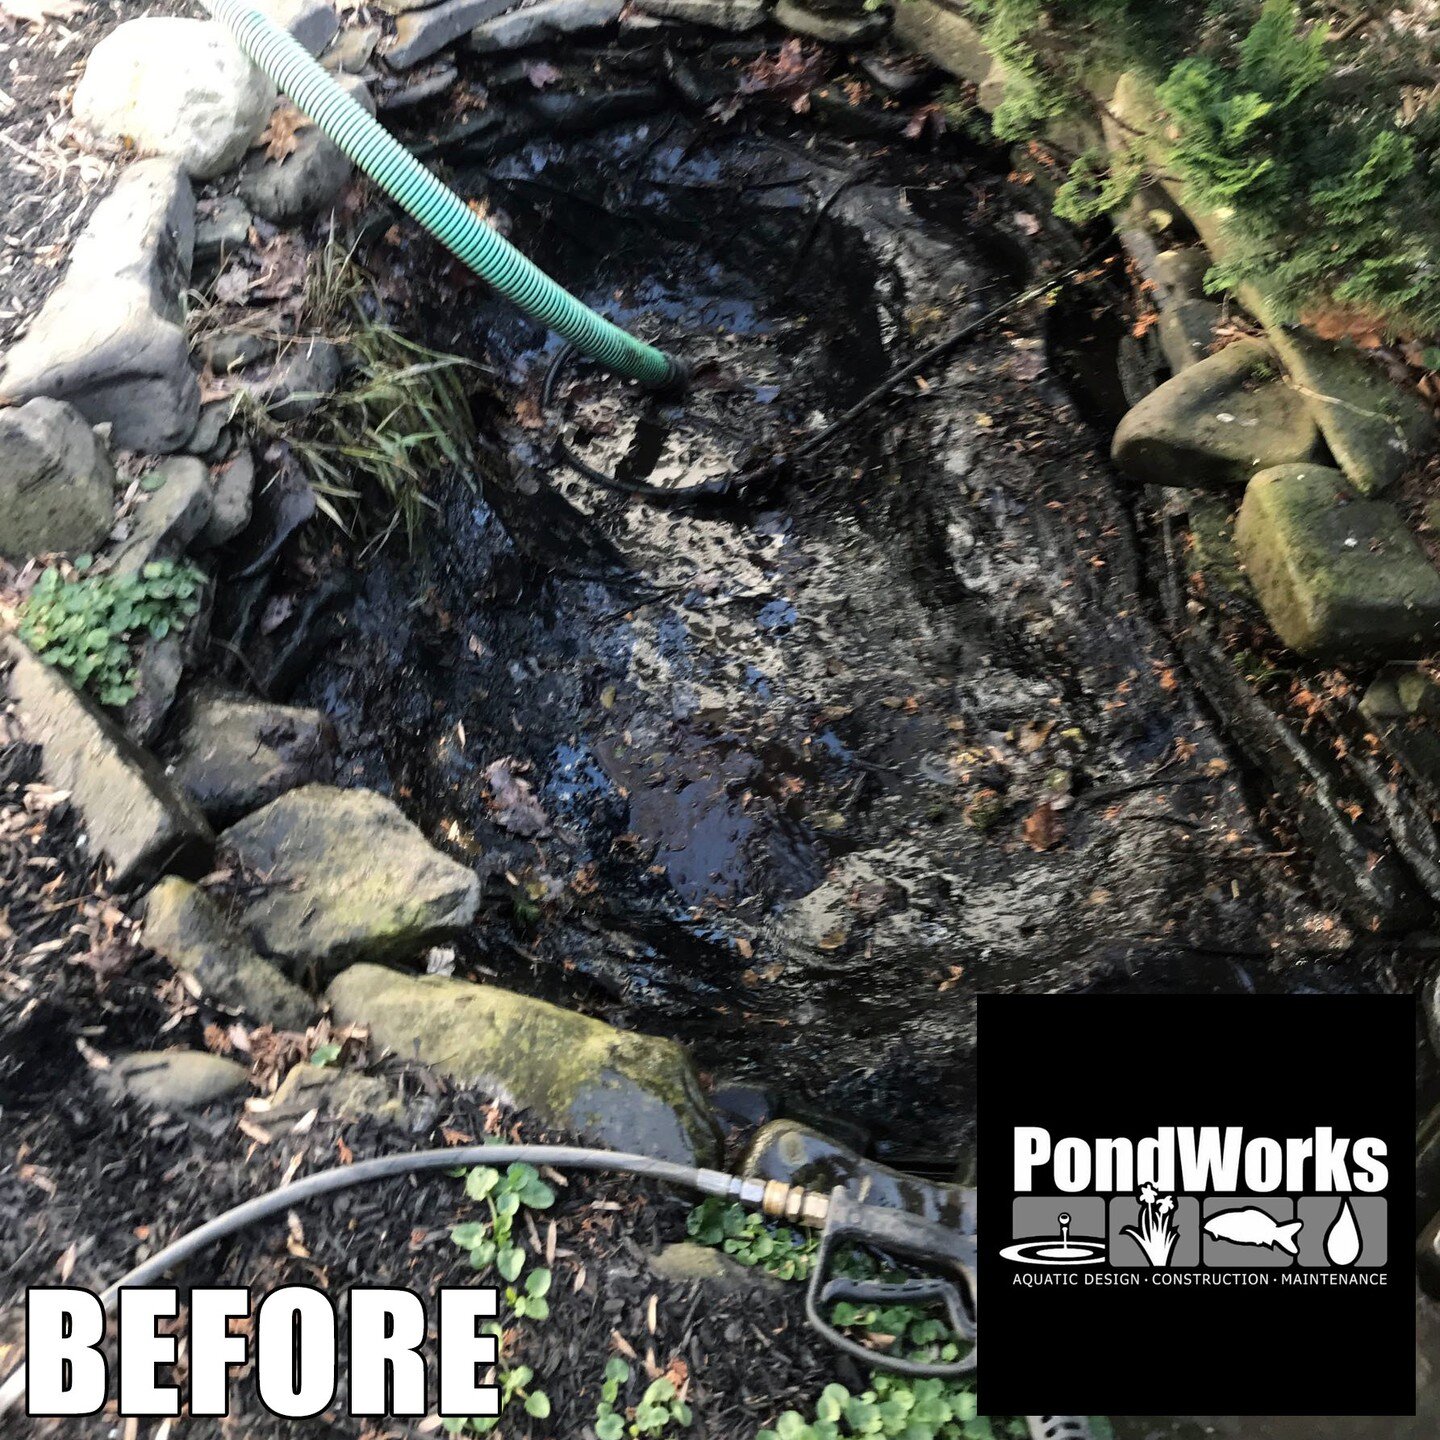 We hope you&rsquo;re all making the most of this winter and the very unpredictable weather (60s in February?).
Before you know it, springtime will be here and that means Spring Cleaning!

Here is a before and after comparison from our Spring Drain an